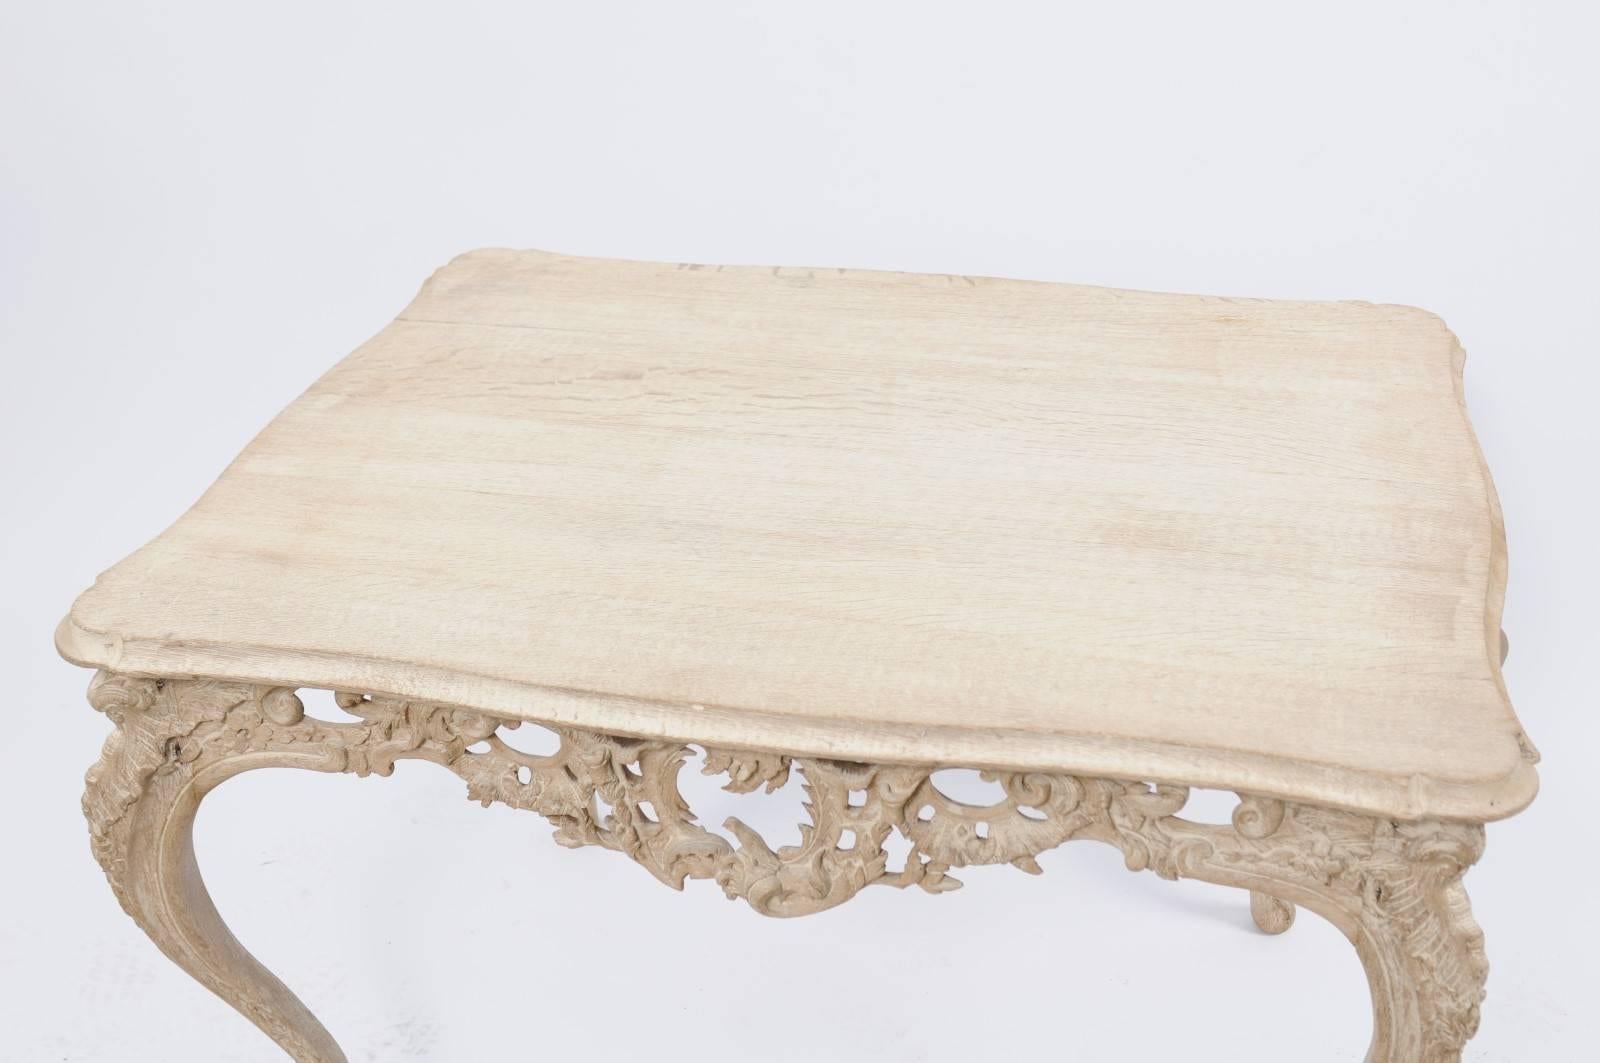 19th Century French Louis XV Style Stripped Oak Side Table with Carved Apron, Cabriole Legs